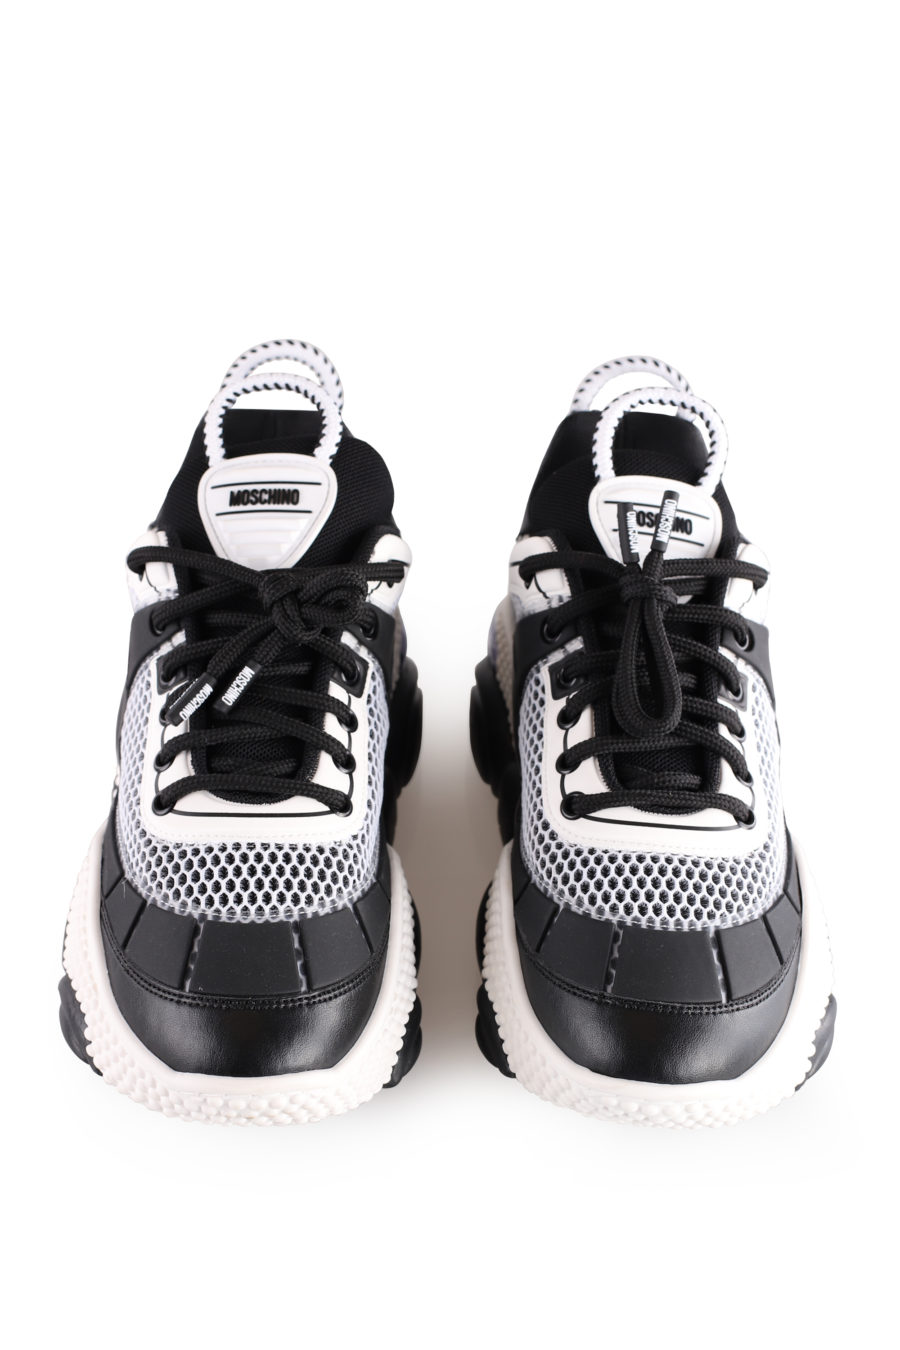 Bubble Teddy" black and white trainers - 088c087c972016af3c5c610ae8ee42ae96b66df0